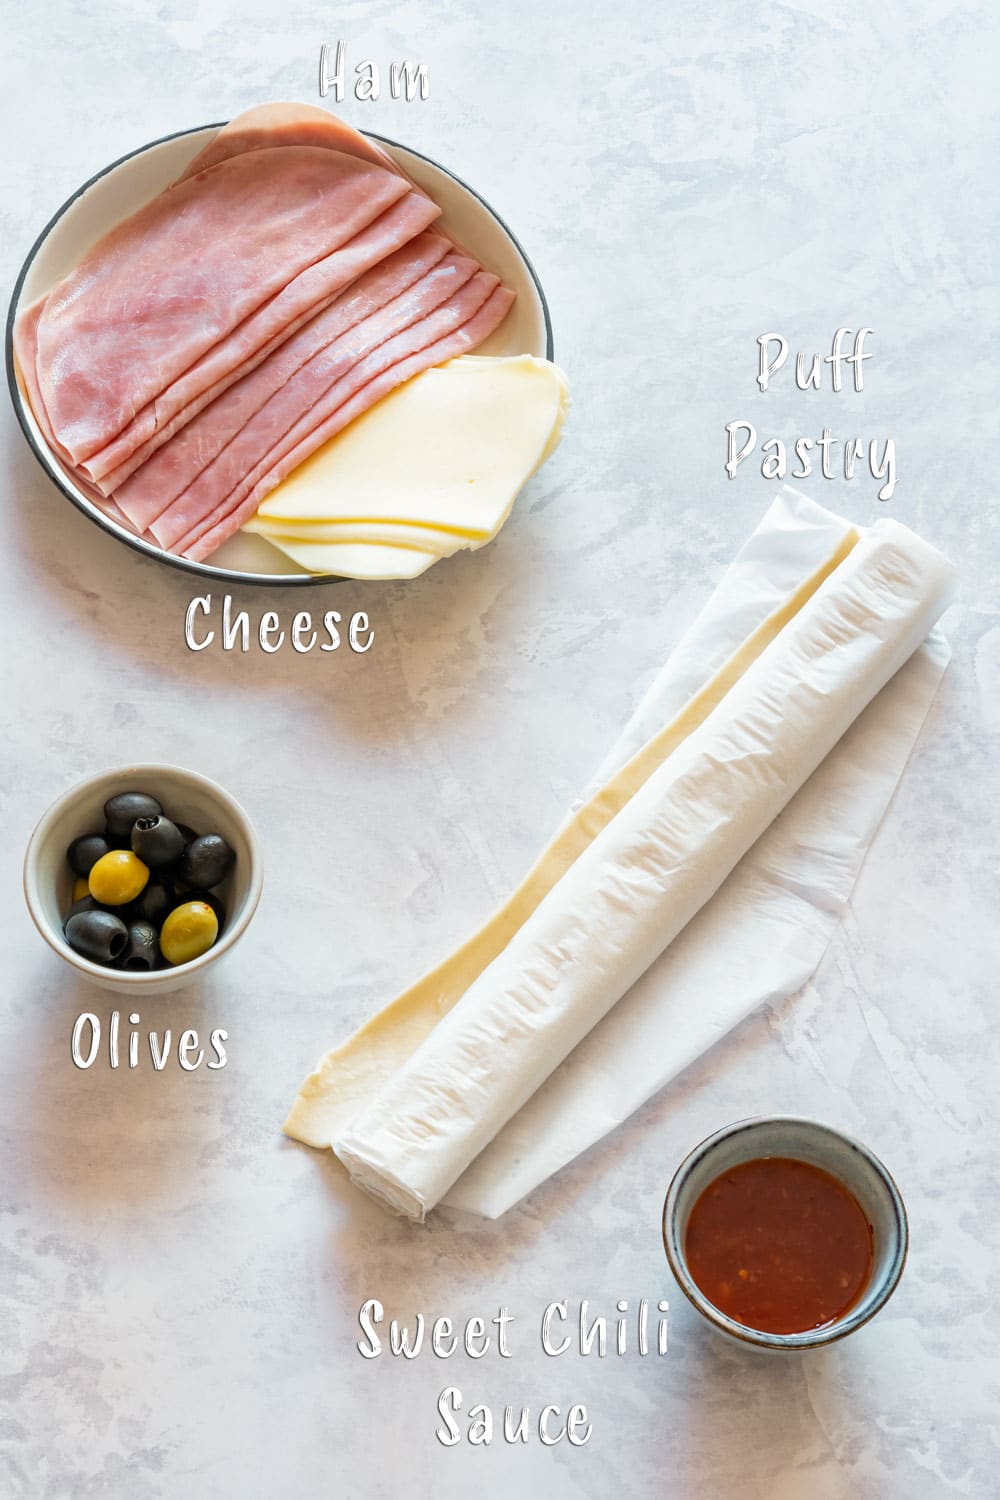 Ingredients for ham and cheese pinwheels - puff pastry, ham, cheese, olives and chili sauce.